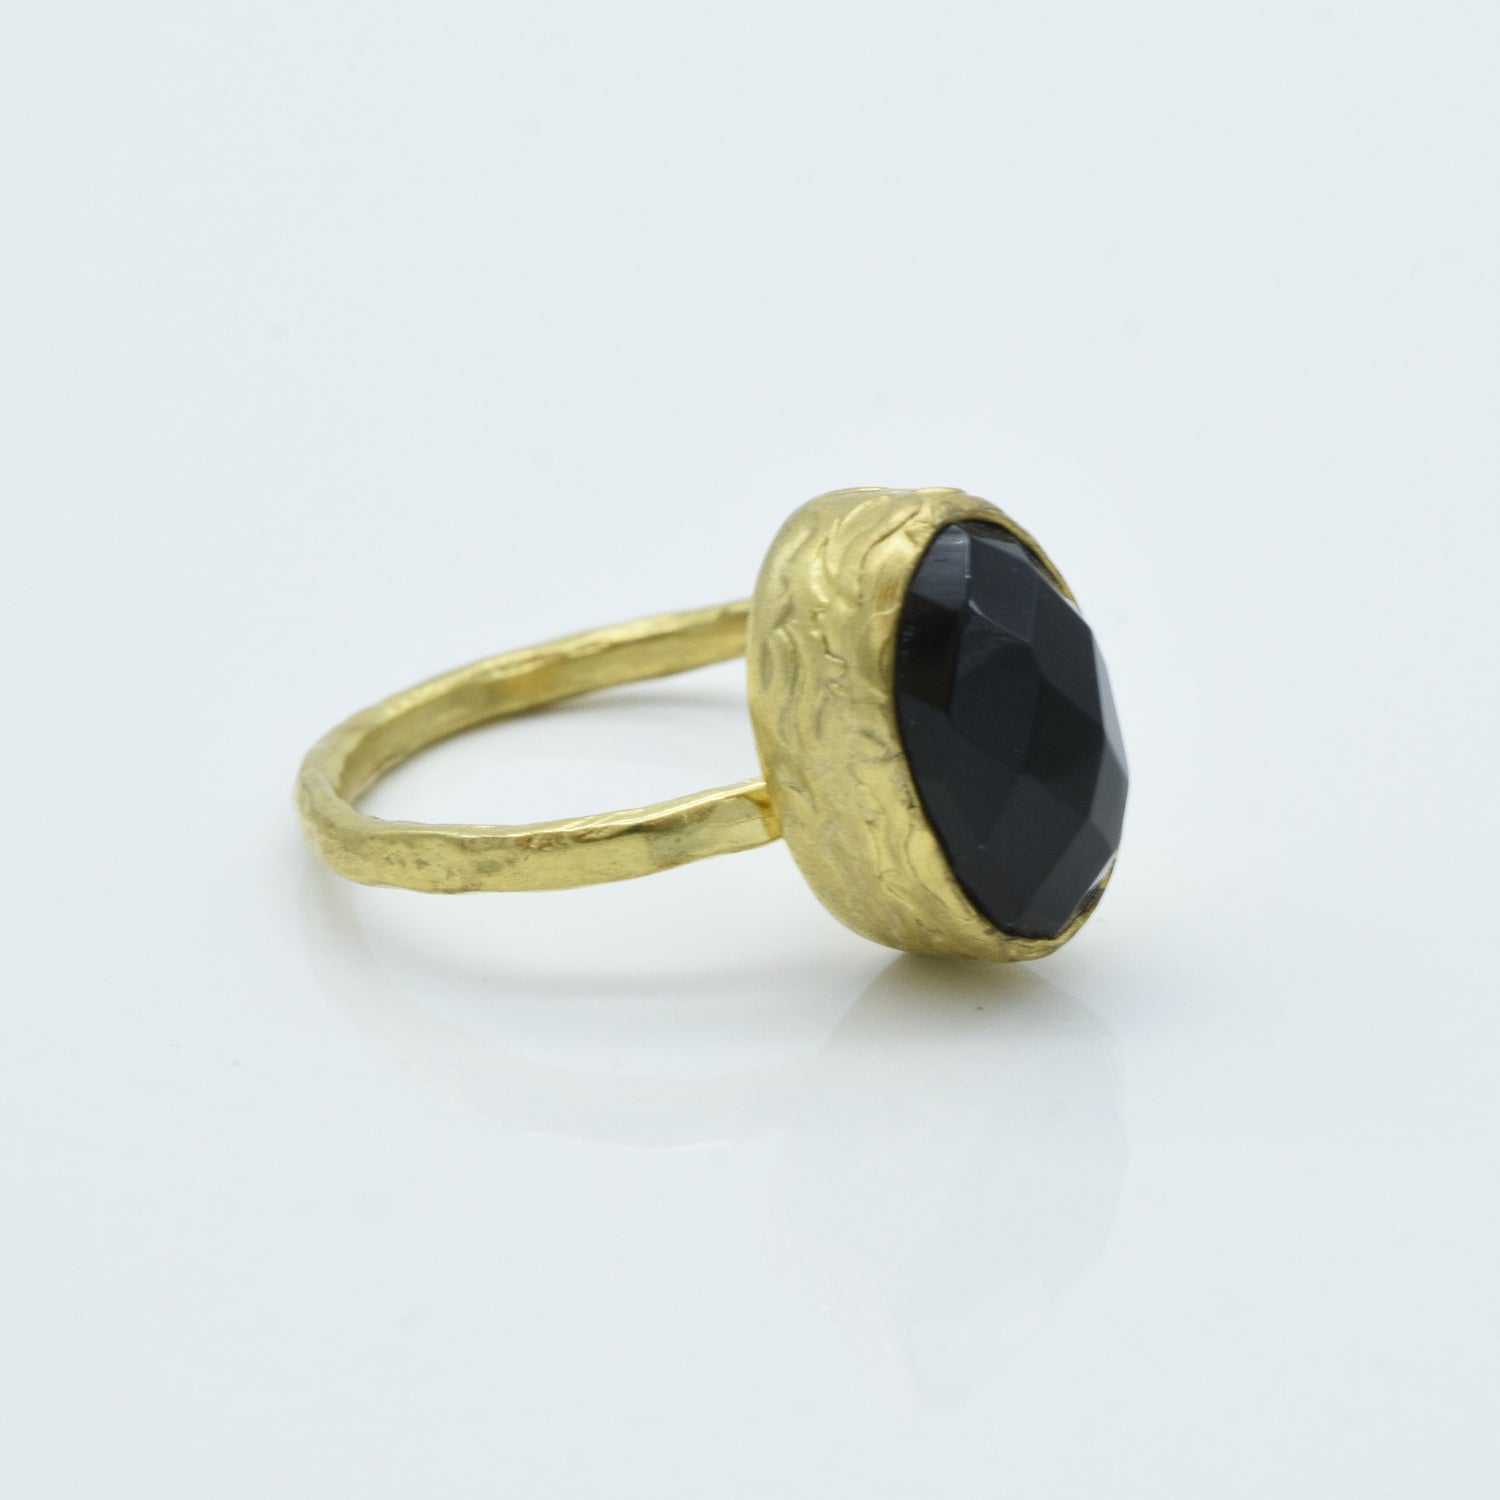 Aylas Onyx adjustable ring - 21ct Gold plated brass - Handmade in Ottoman Style by Artisan